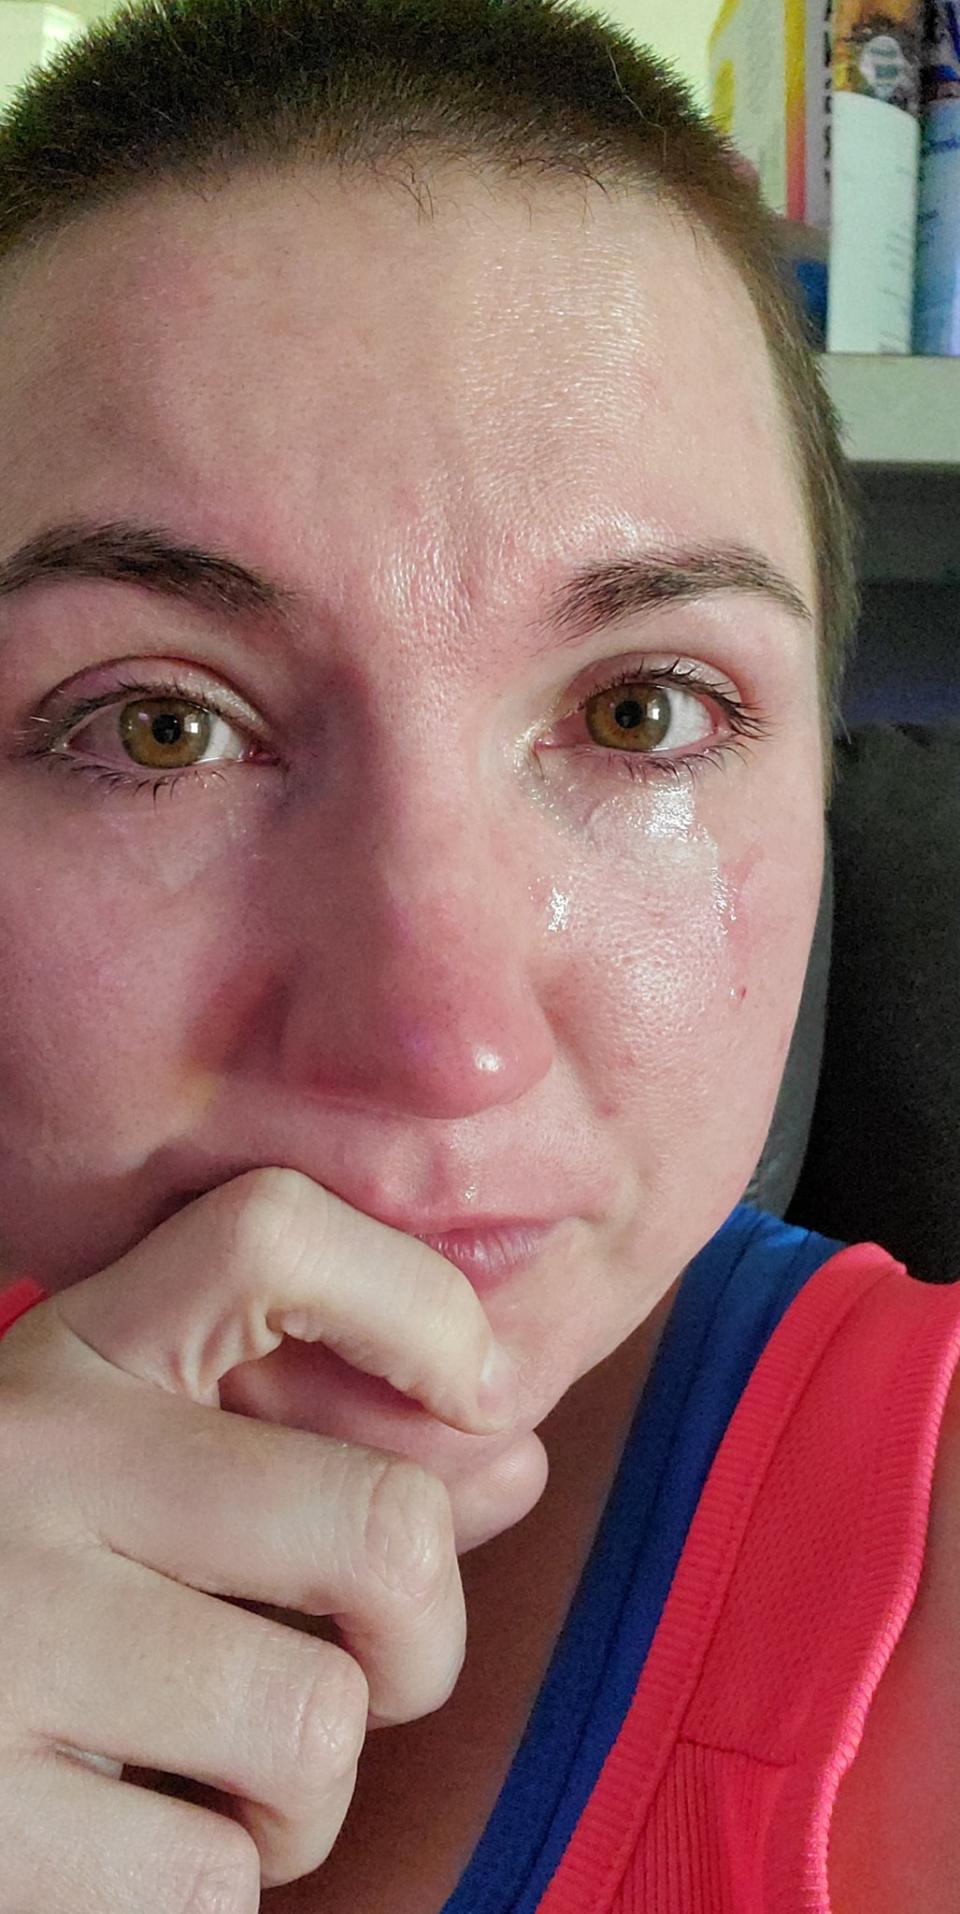 Ms Oechsle shared this tearful selfie after making the decision to leave her daughter with a family friend until the pandemic is over. Source: Facebook